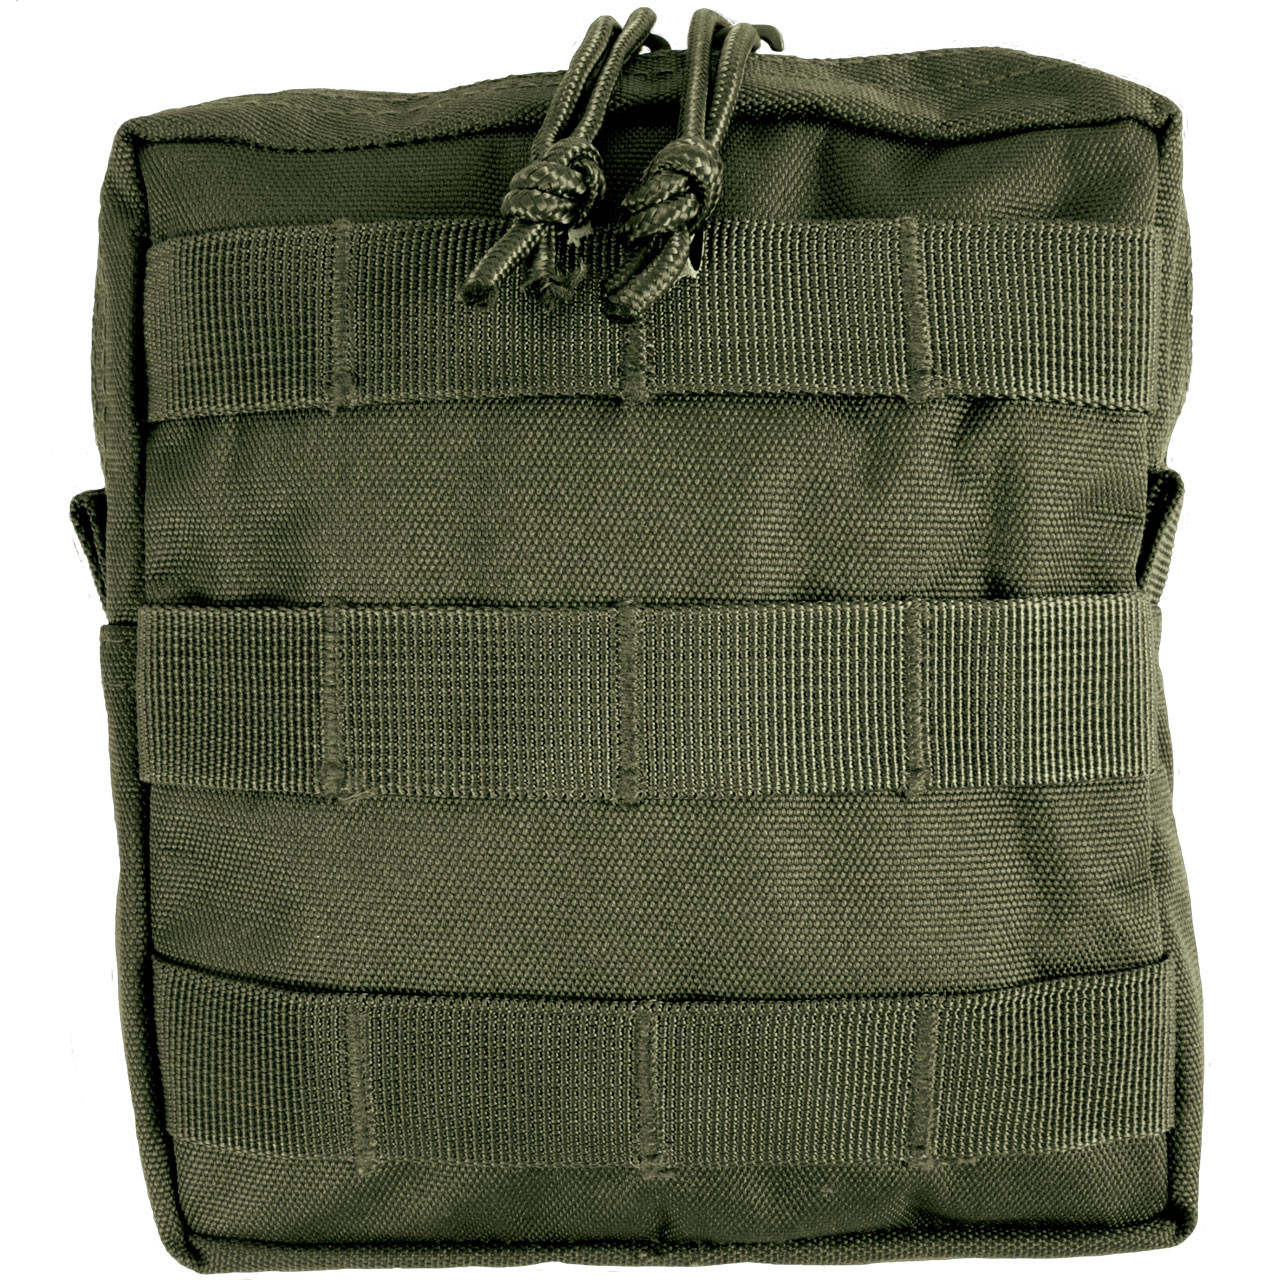 Medium MOLLE Utility Pouch - Olive Drab - Front